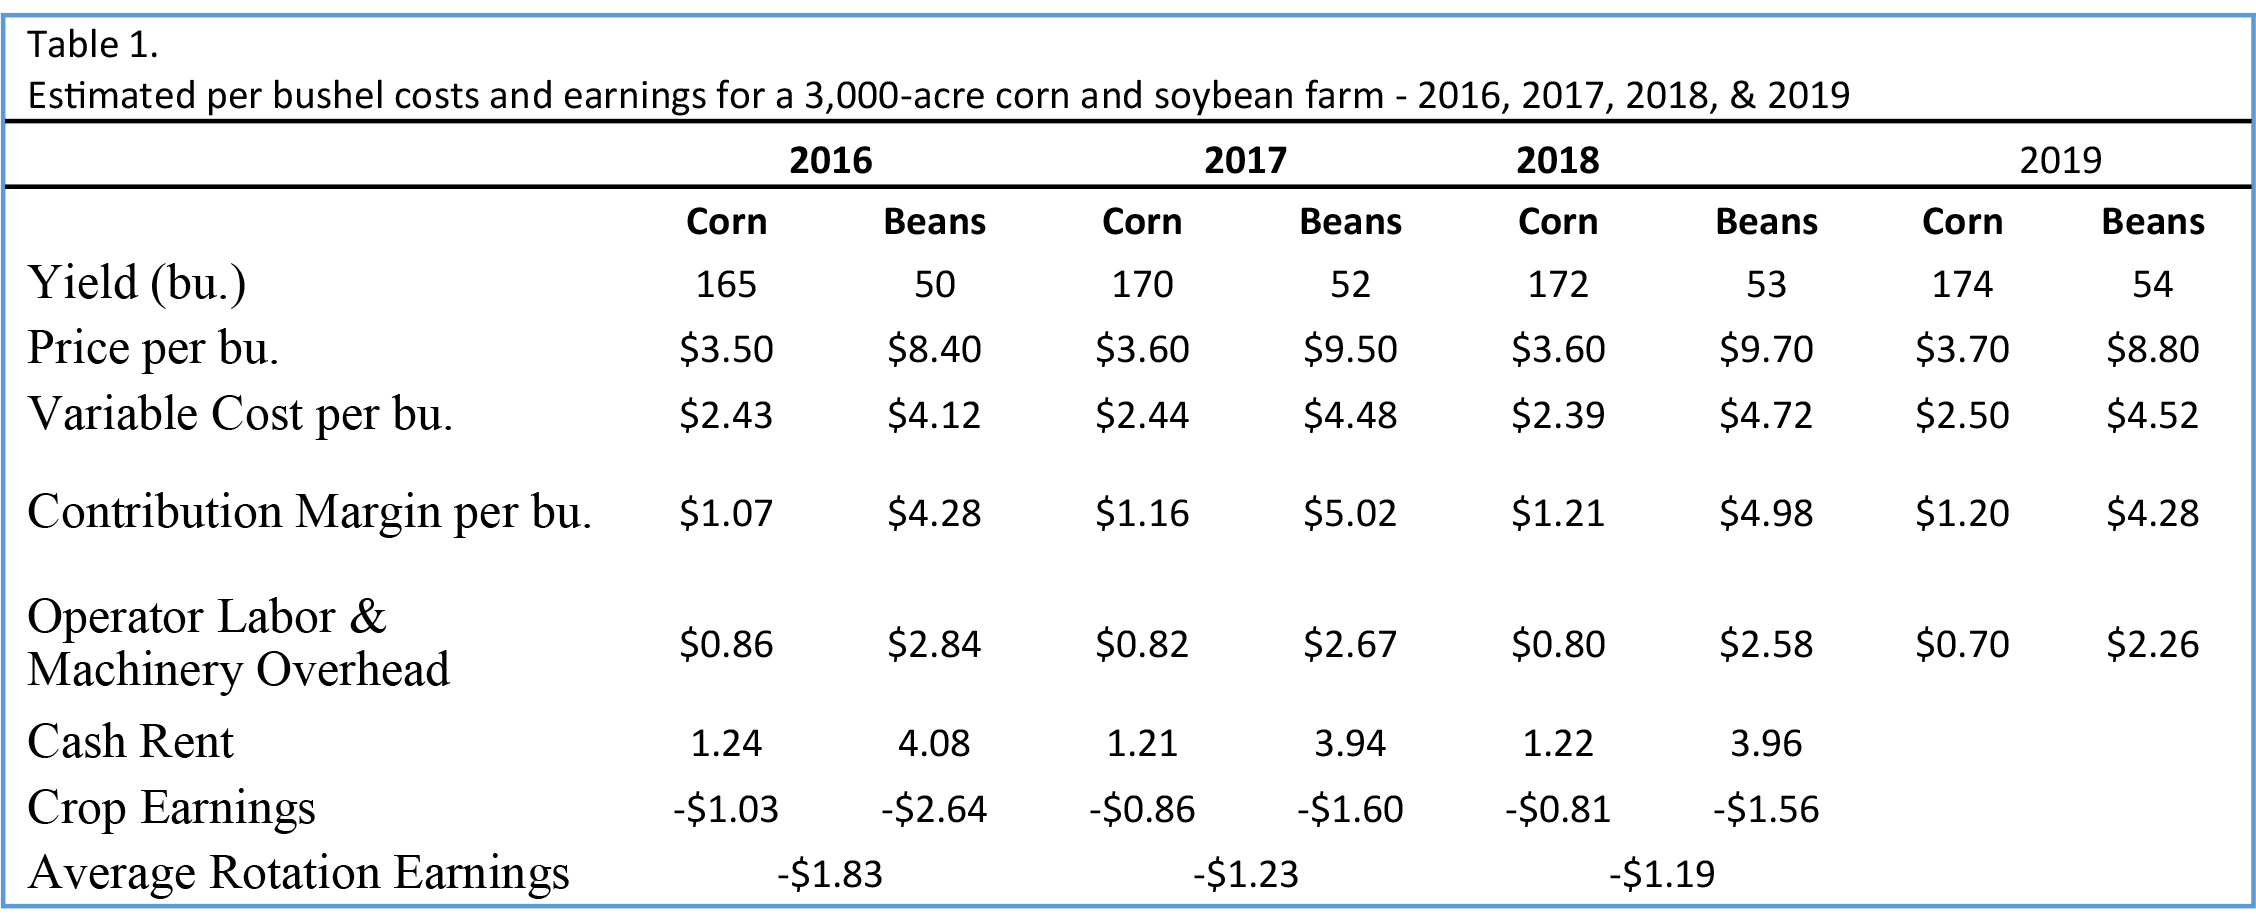 Table 1. Estimated per bushel costs and earnings for a 3,000-acre corn and soybean farm - 2016, 2017, 2018, & 2019